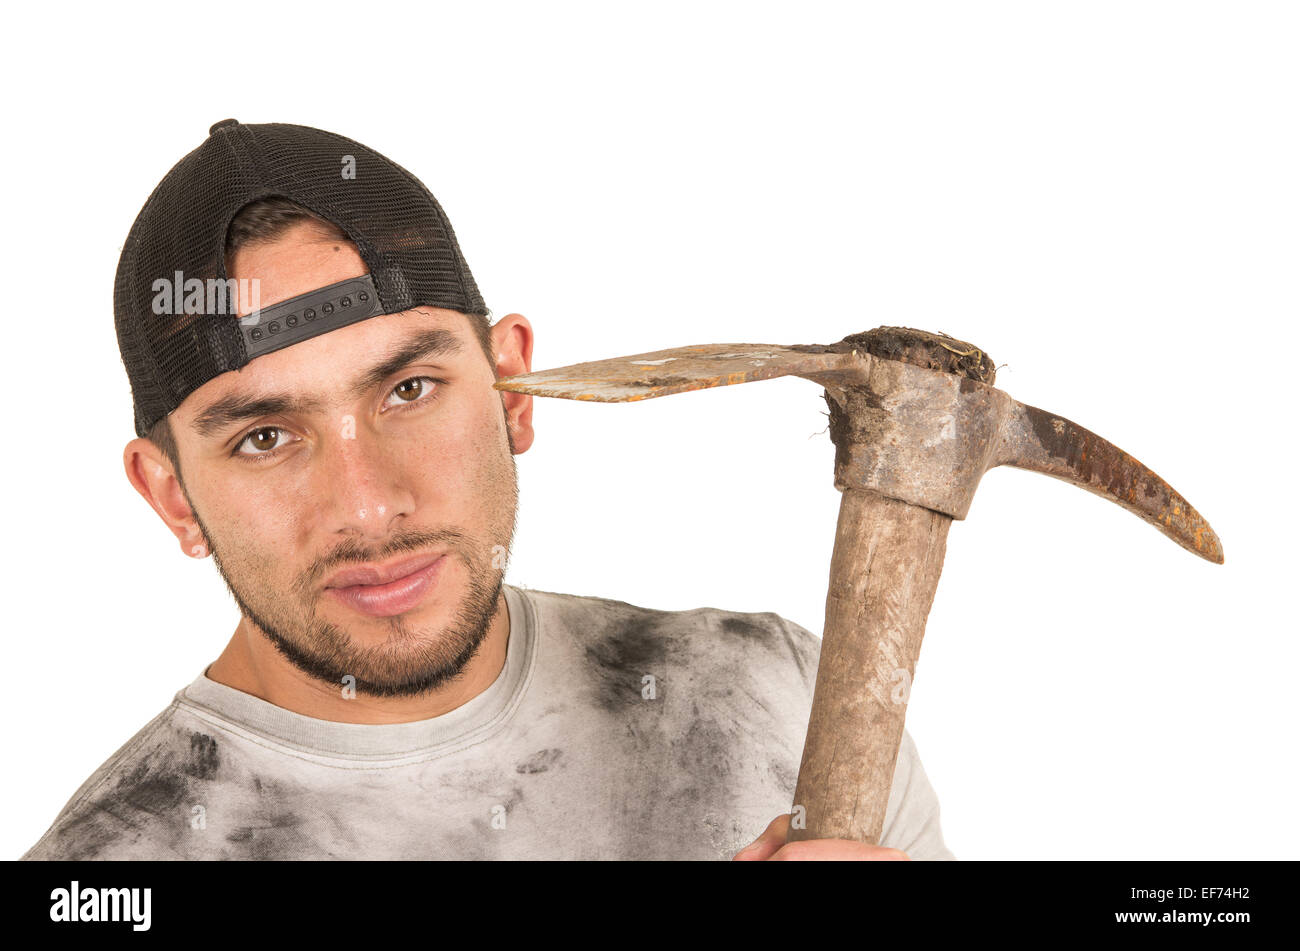 young muscular latin construction worker Stock Photo